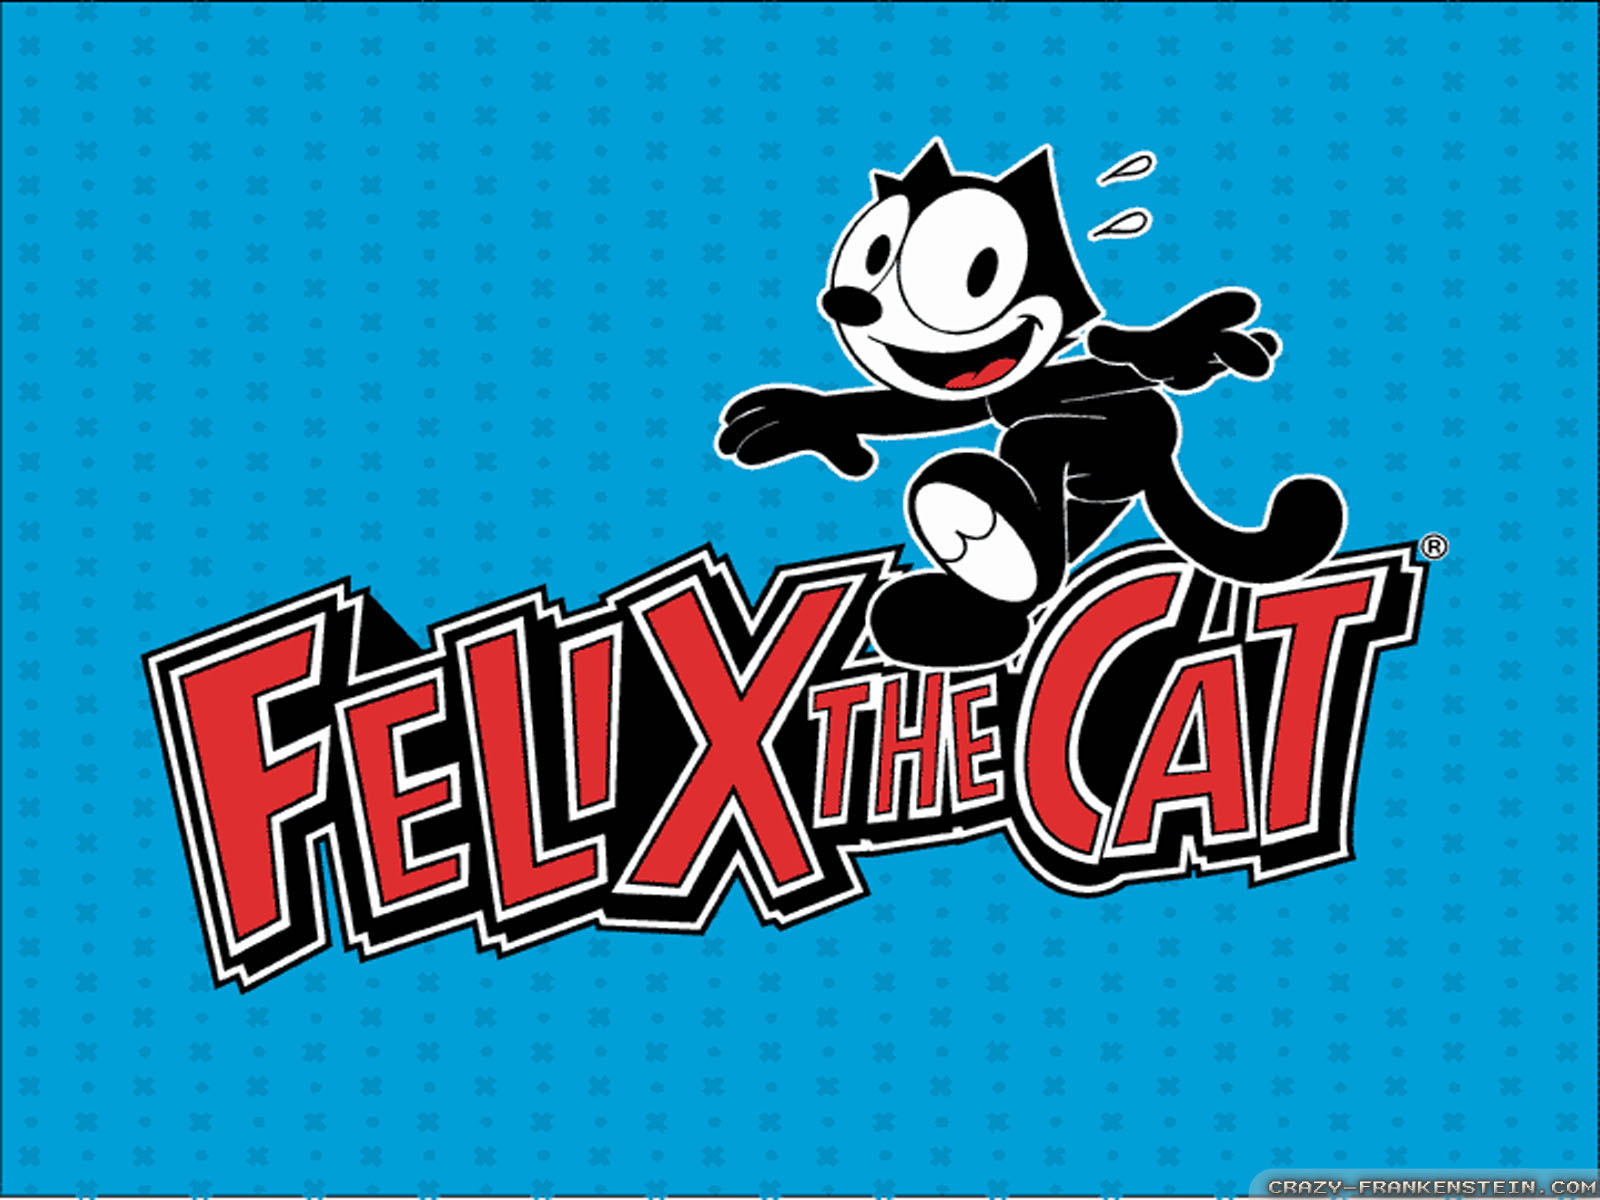 Felix The Cat Wallpapers and Background Images   stmednet